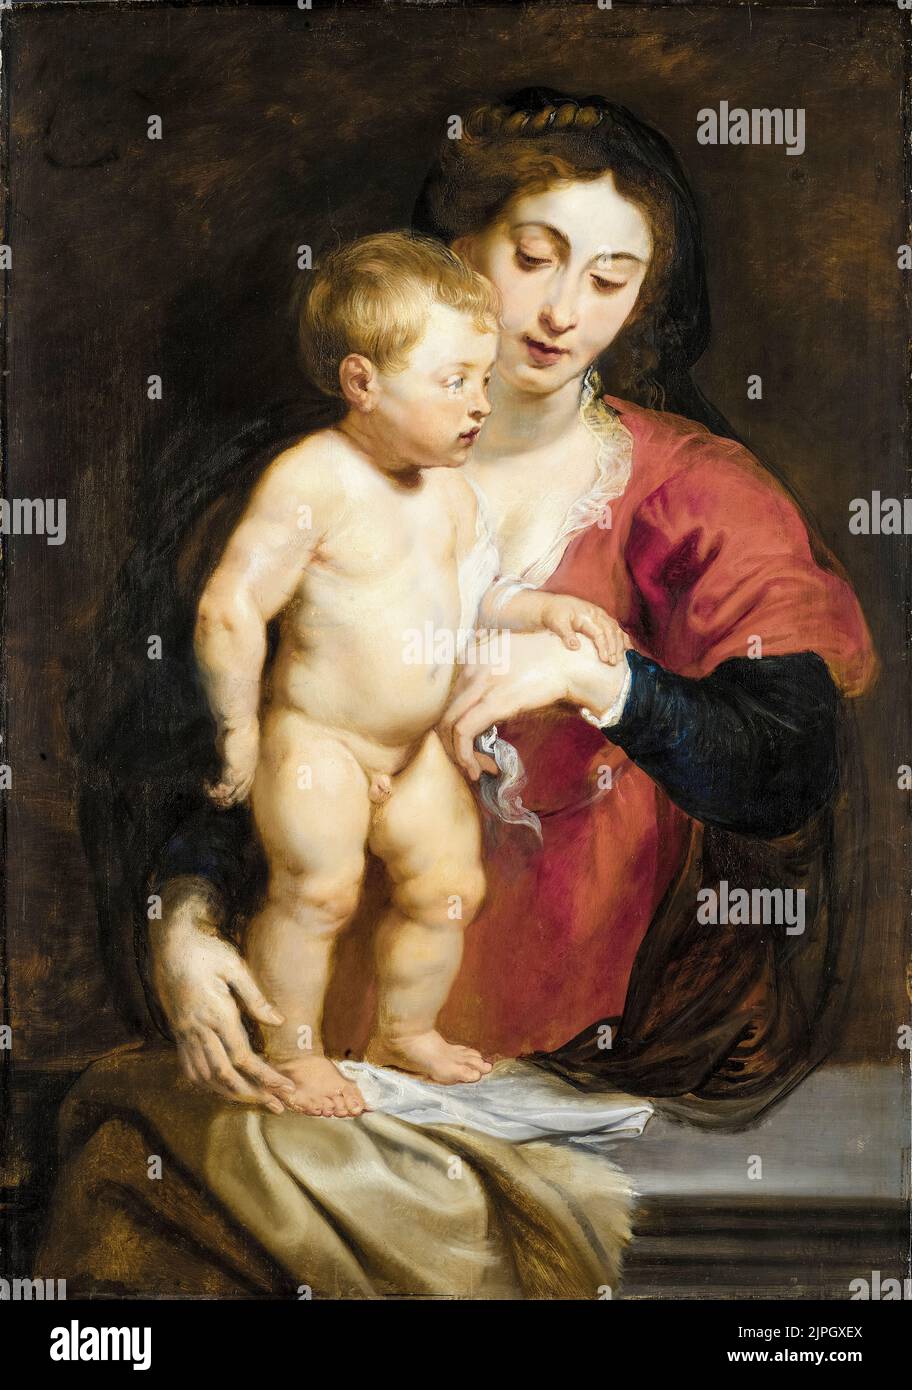 Peter Paul Rubens, Madonna and Child, painting in oil on panel, 1615-1618 Stock Photo